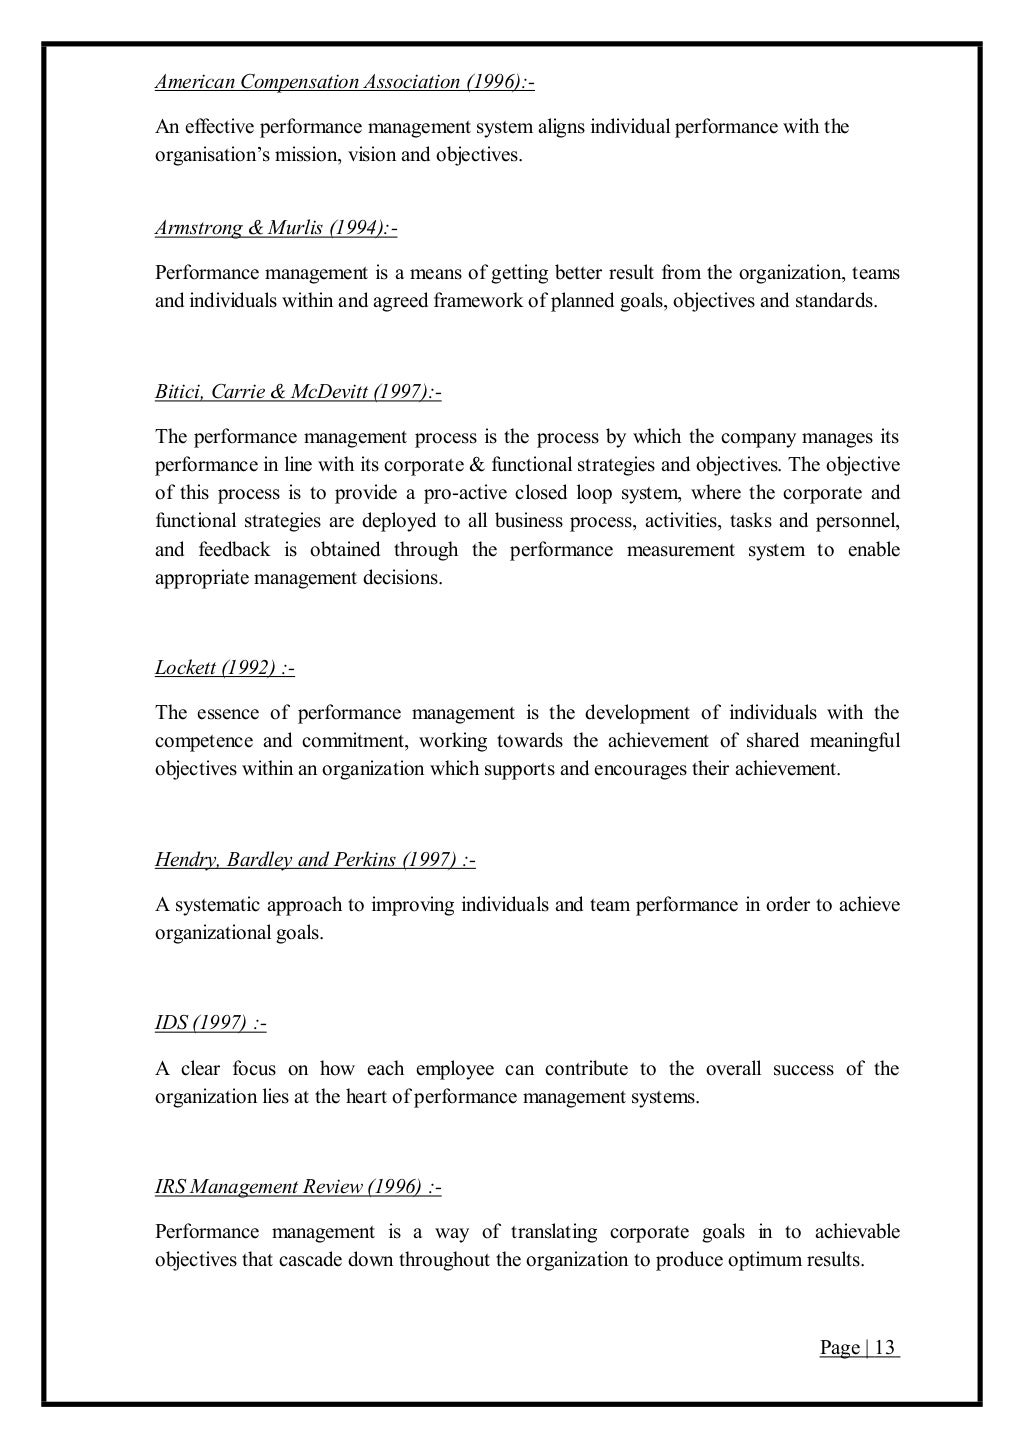 research proposal on performance management system